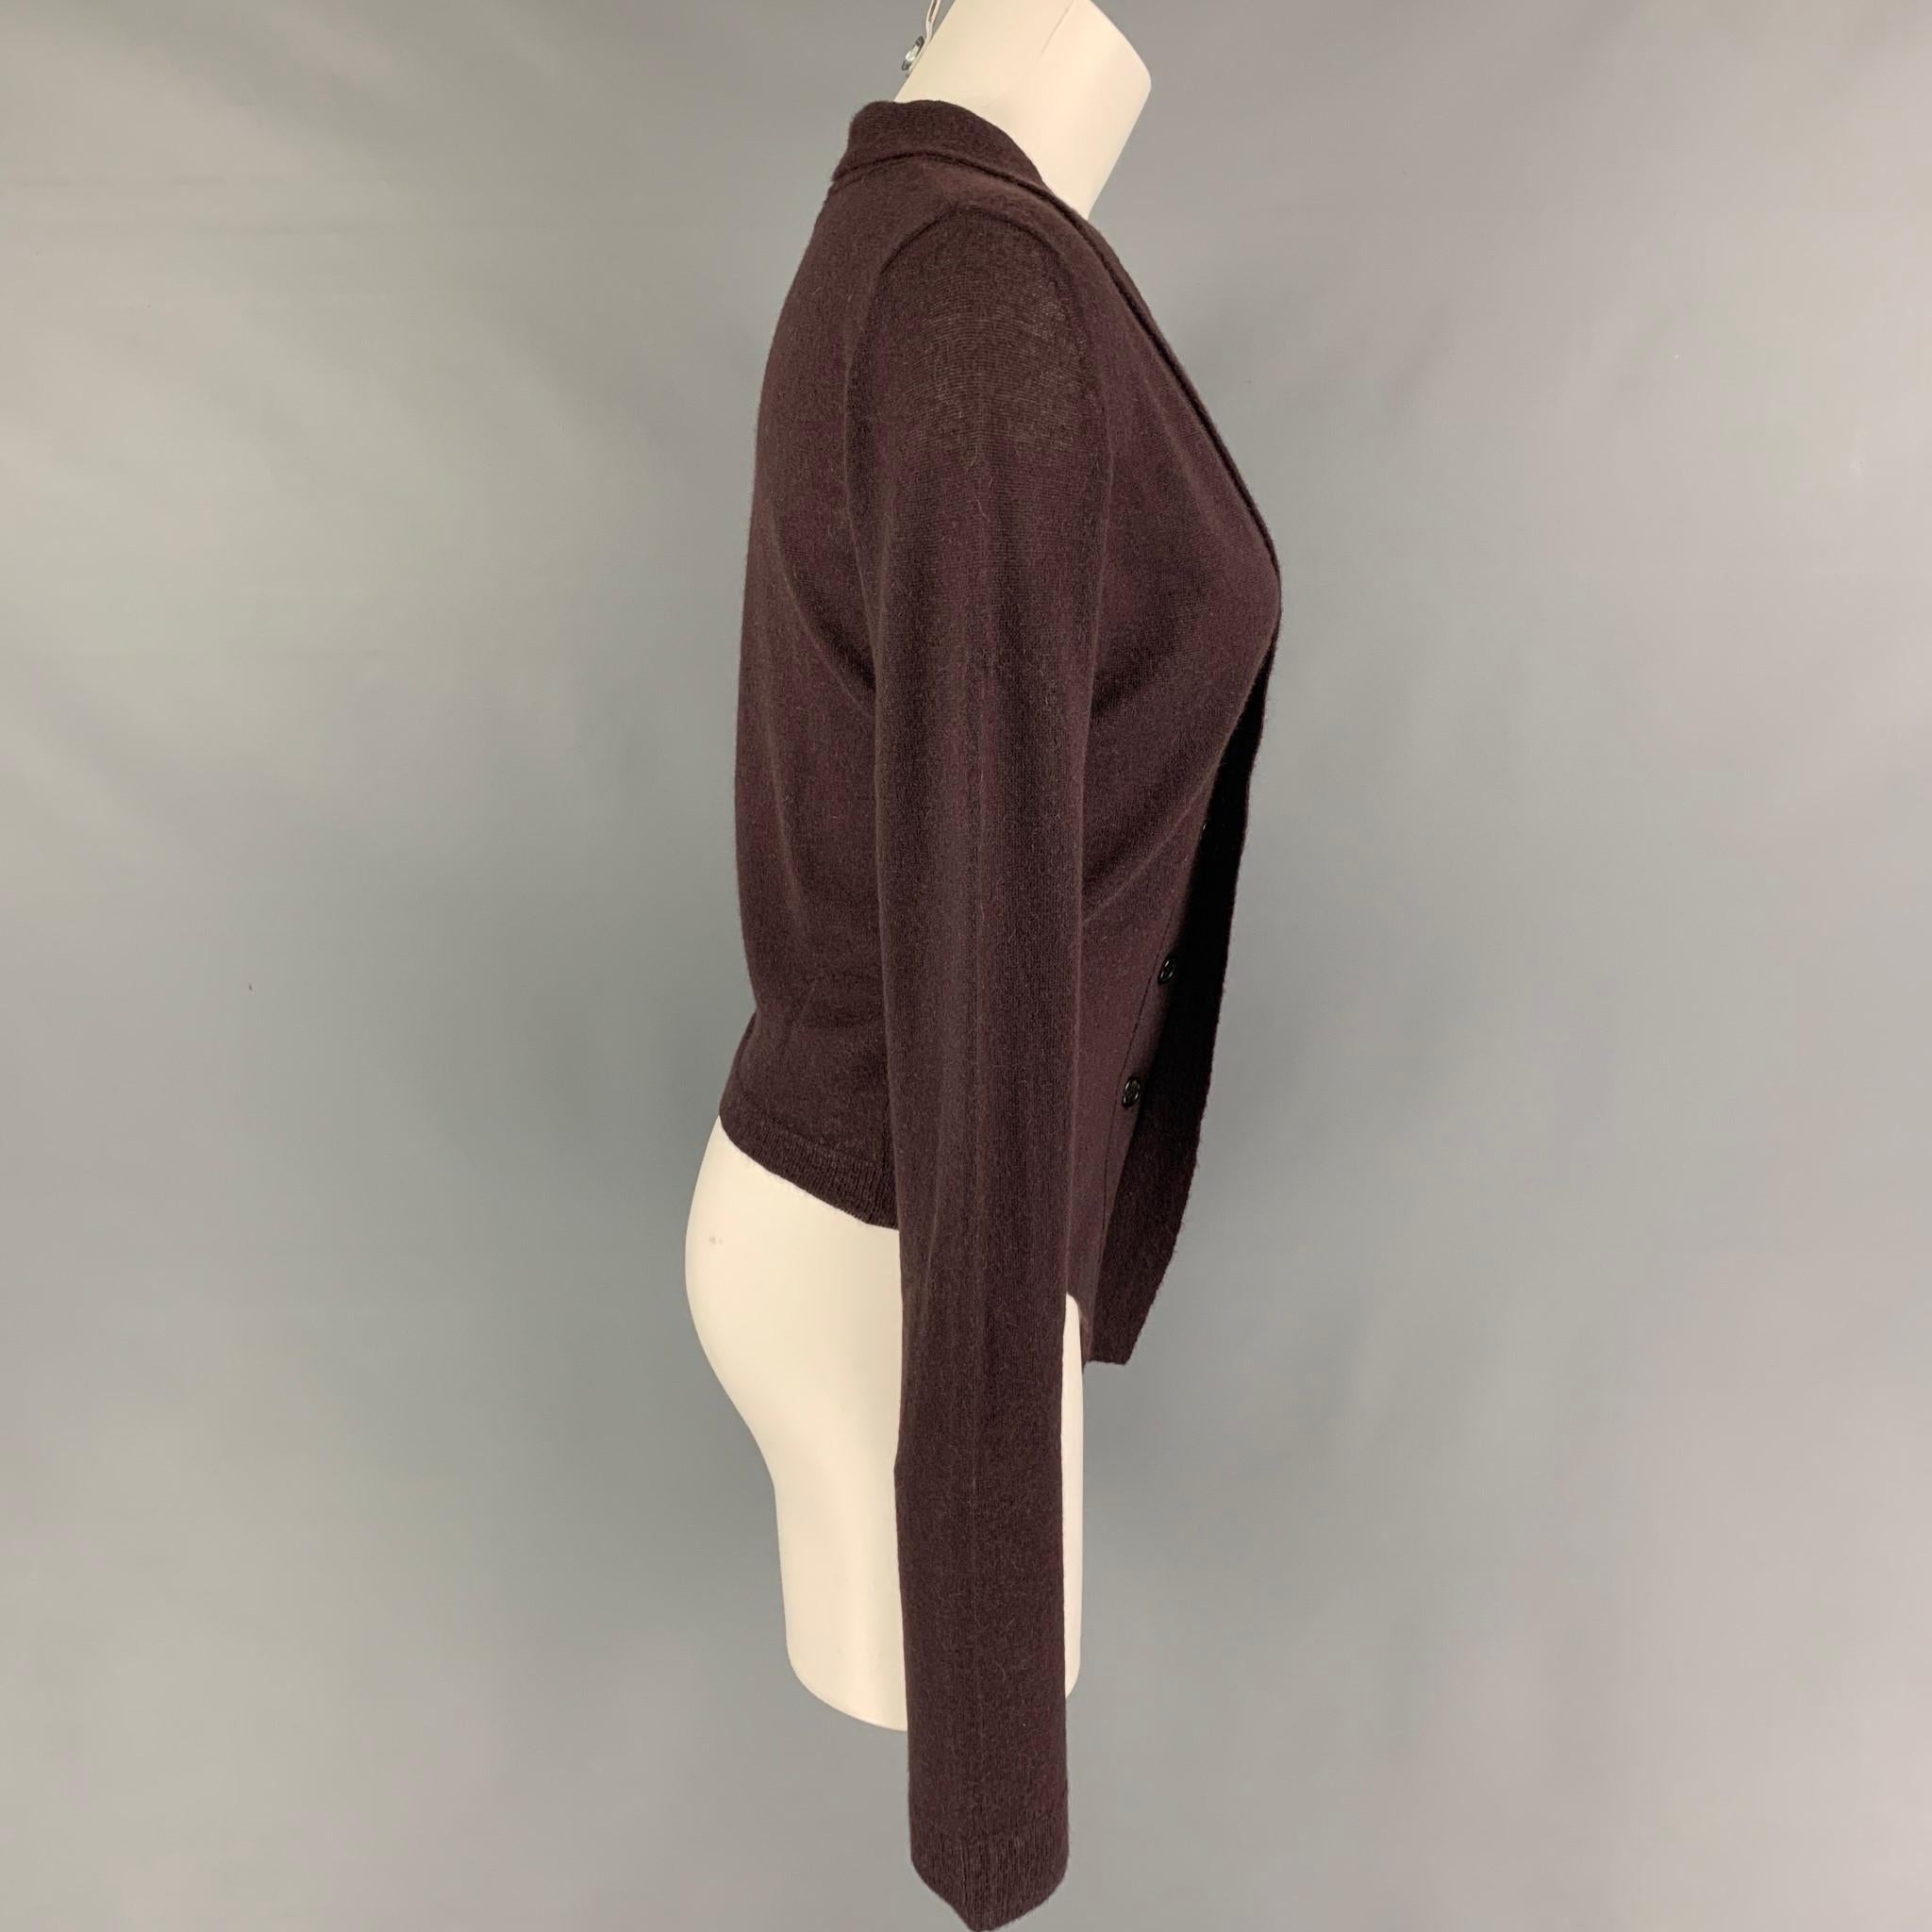 ANN DEMEULEMEESTER cardigan comes in a burgundy knitted cashmere blend featuring a shawl collar and a hidden placket closure. 

Excellent Pre-Owned Condition.
Marked: 38

Measurements:

Shoulder: 15.5 in.
Bust: 36 in.
Sleeve: 32.5 in.
Length: 18 in.